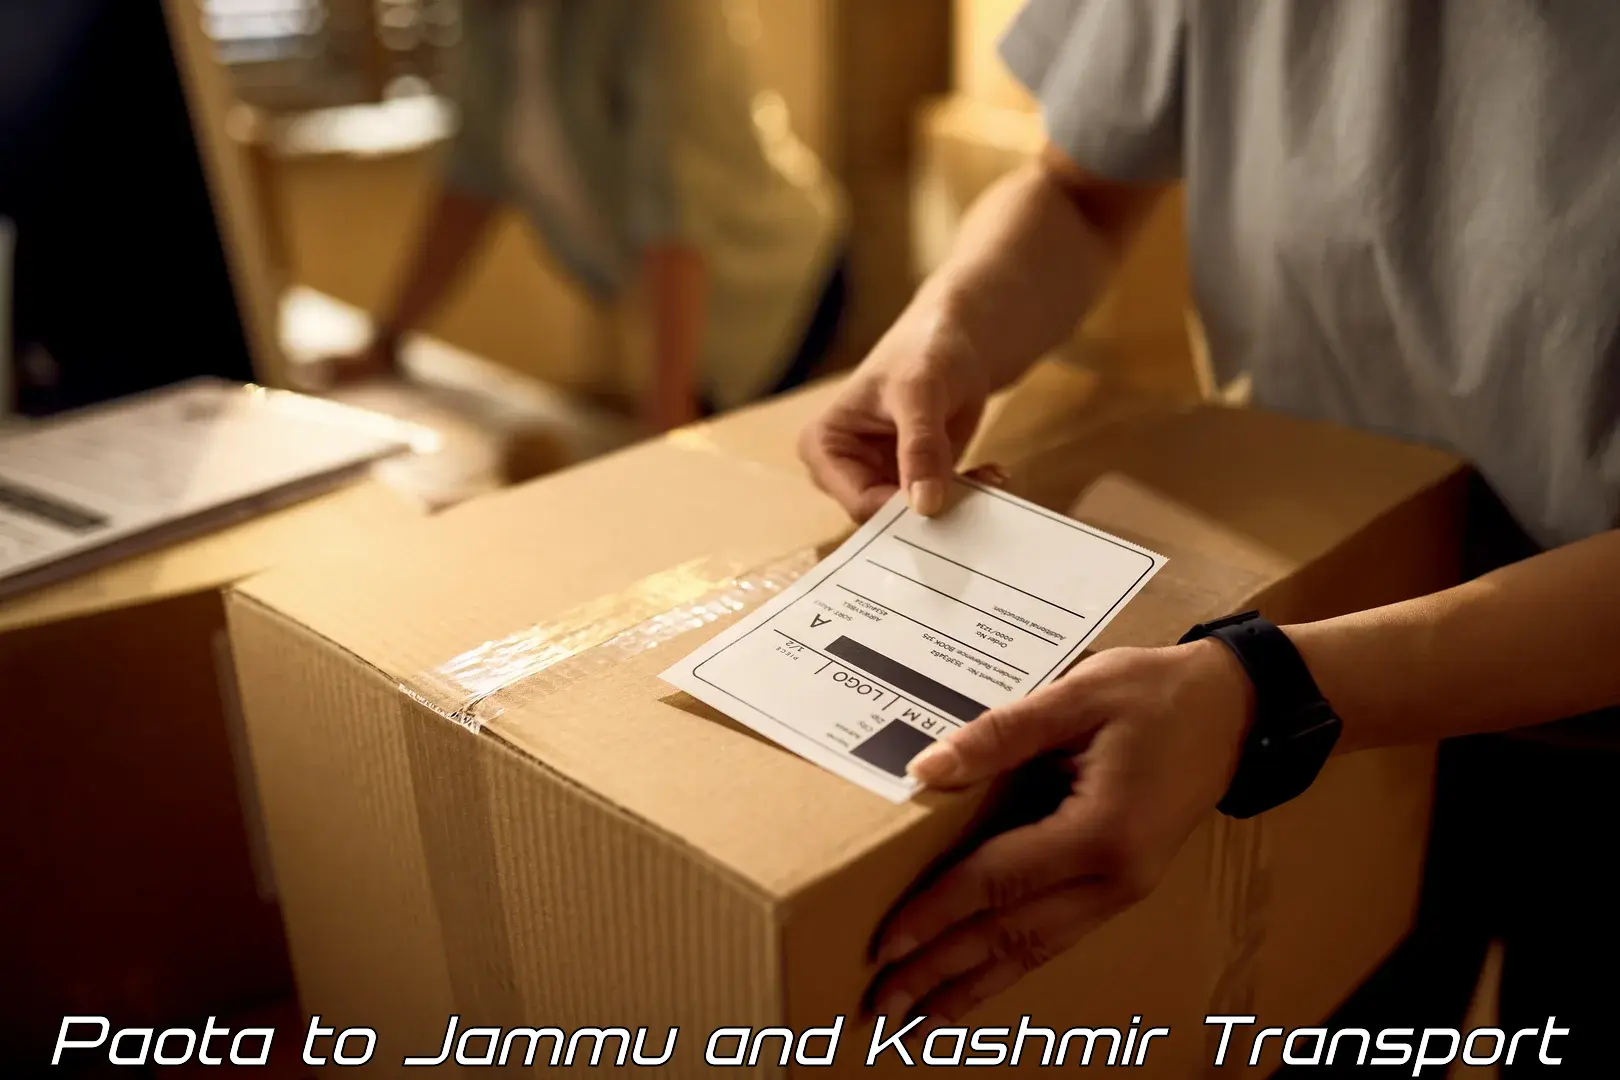 Container transportation services Paota to Jammu and Kashmir